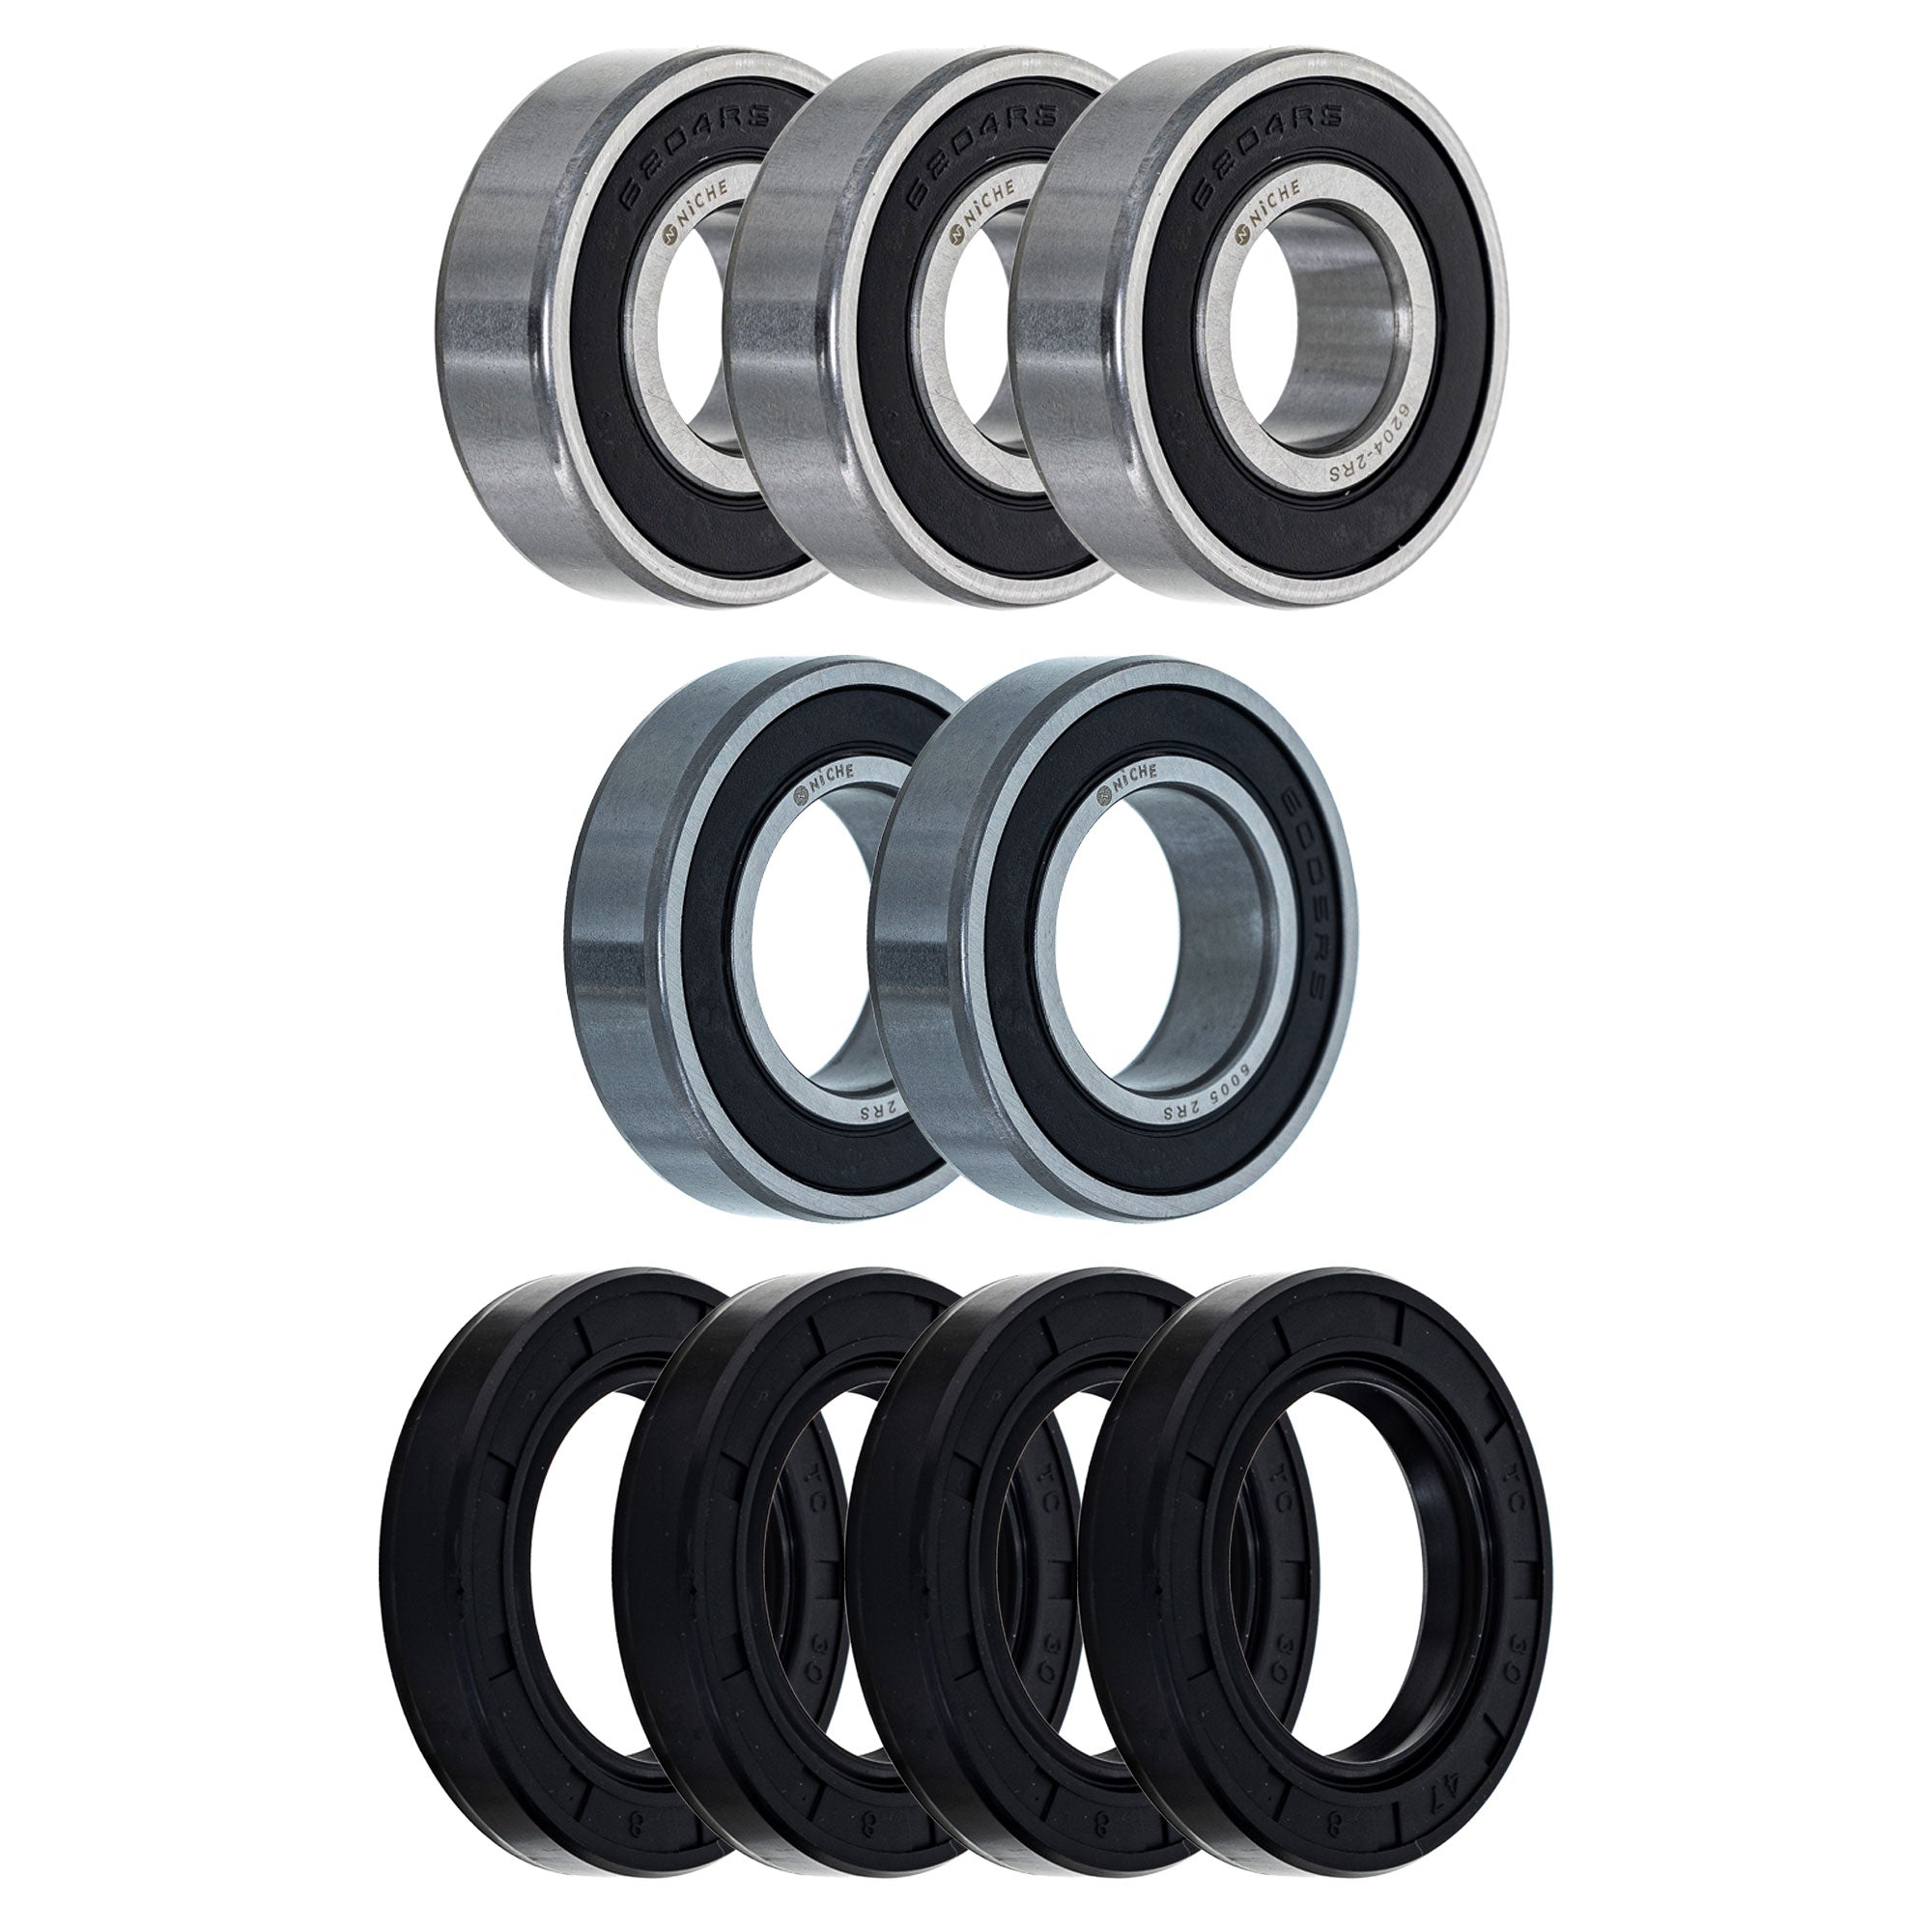 Wheel Bearing Seal Kit for zOTHER Ref No F800R NICHE MK1008465